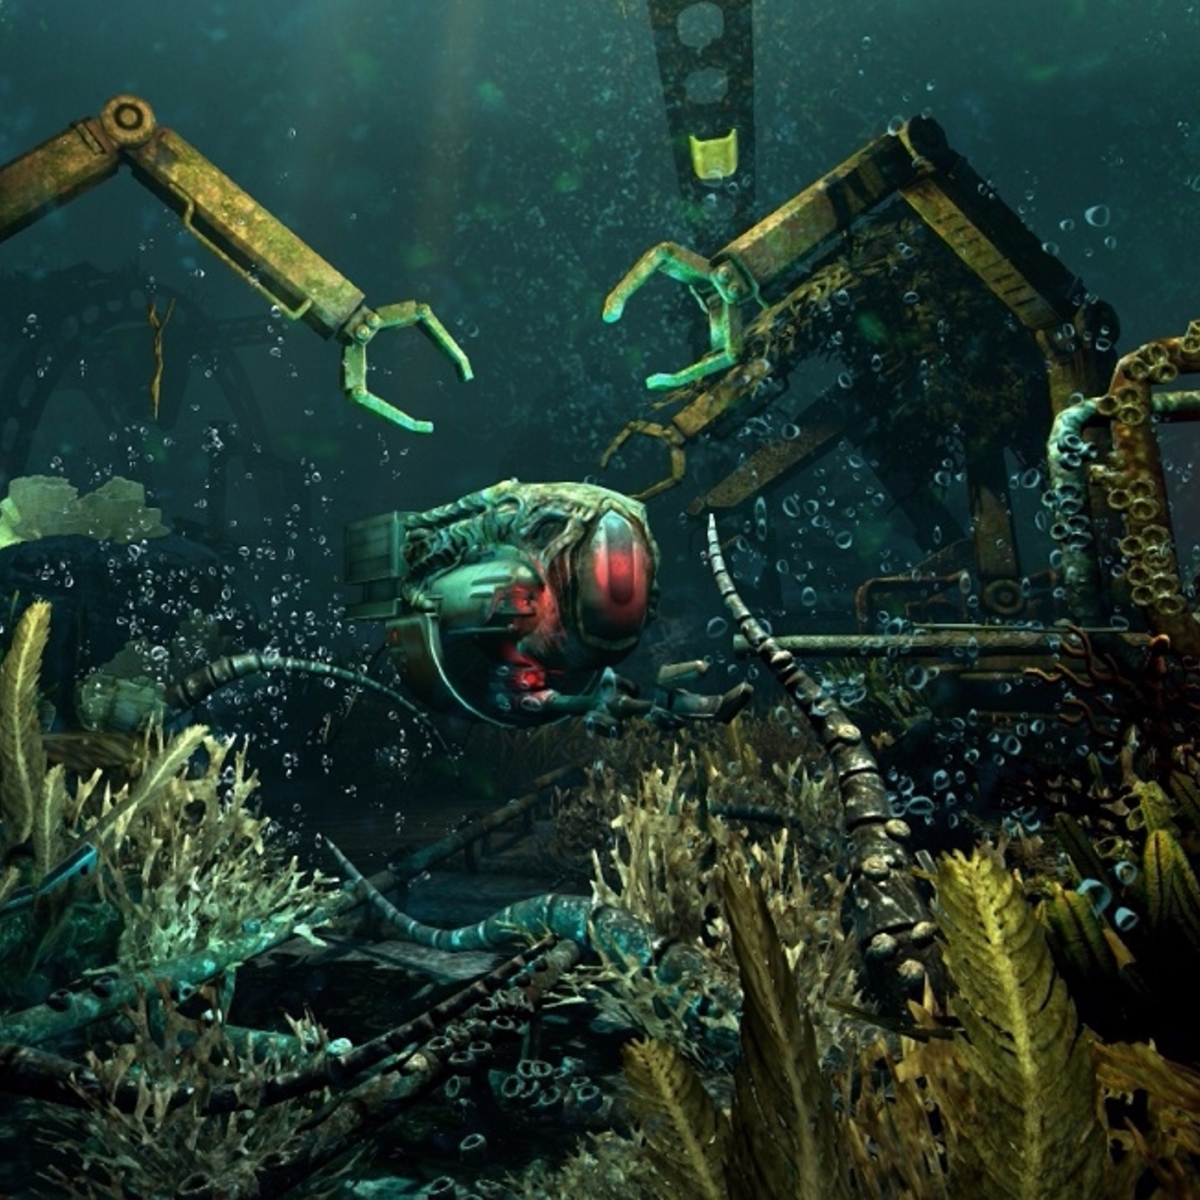 soma-may-be-arriving-on-xbox-soon